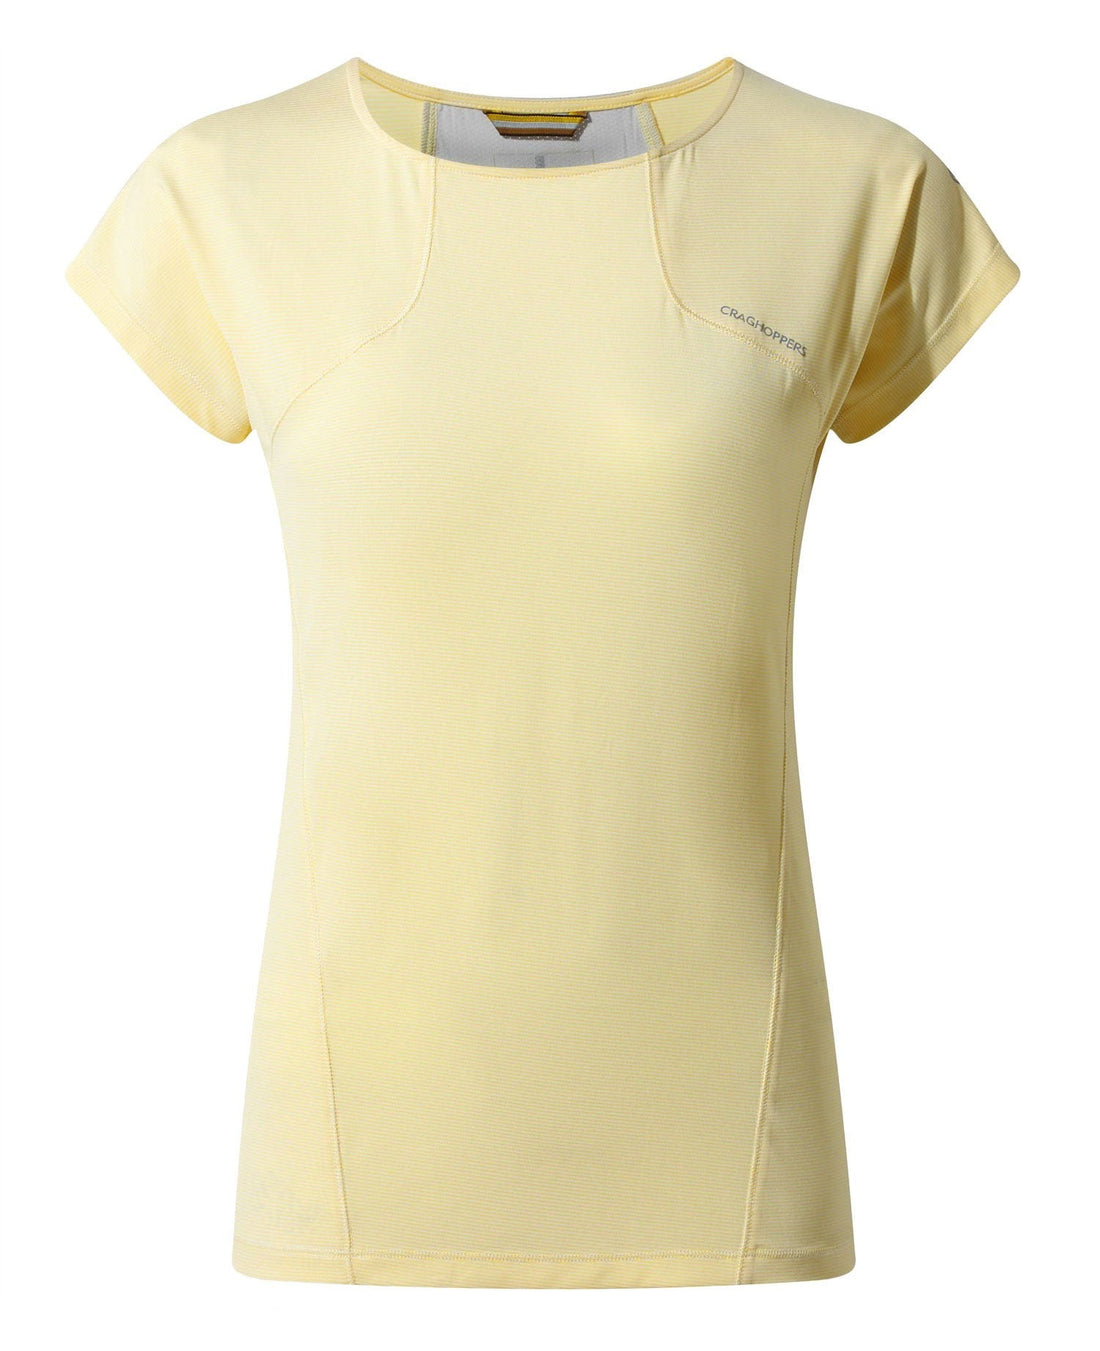 Craghoppers Fusion T-Shirt in Buttercup 